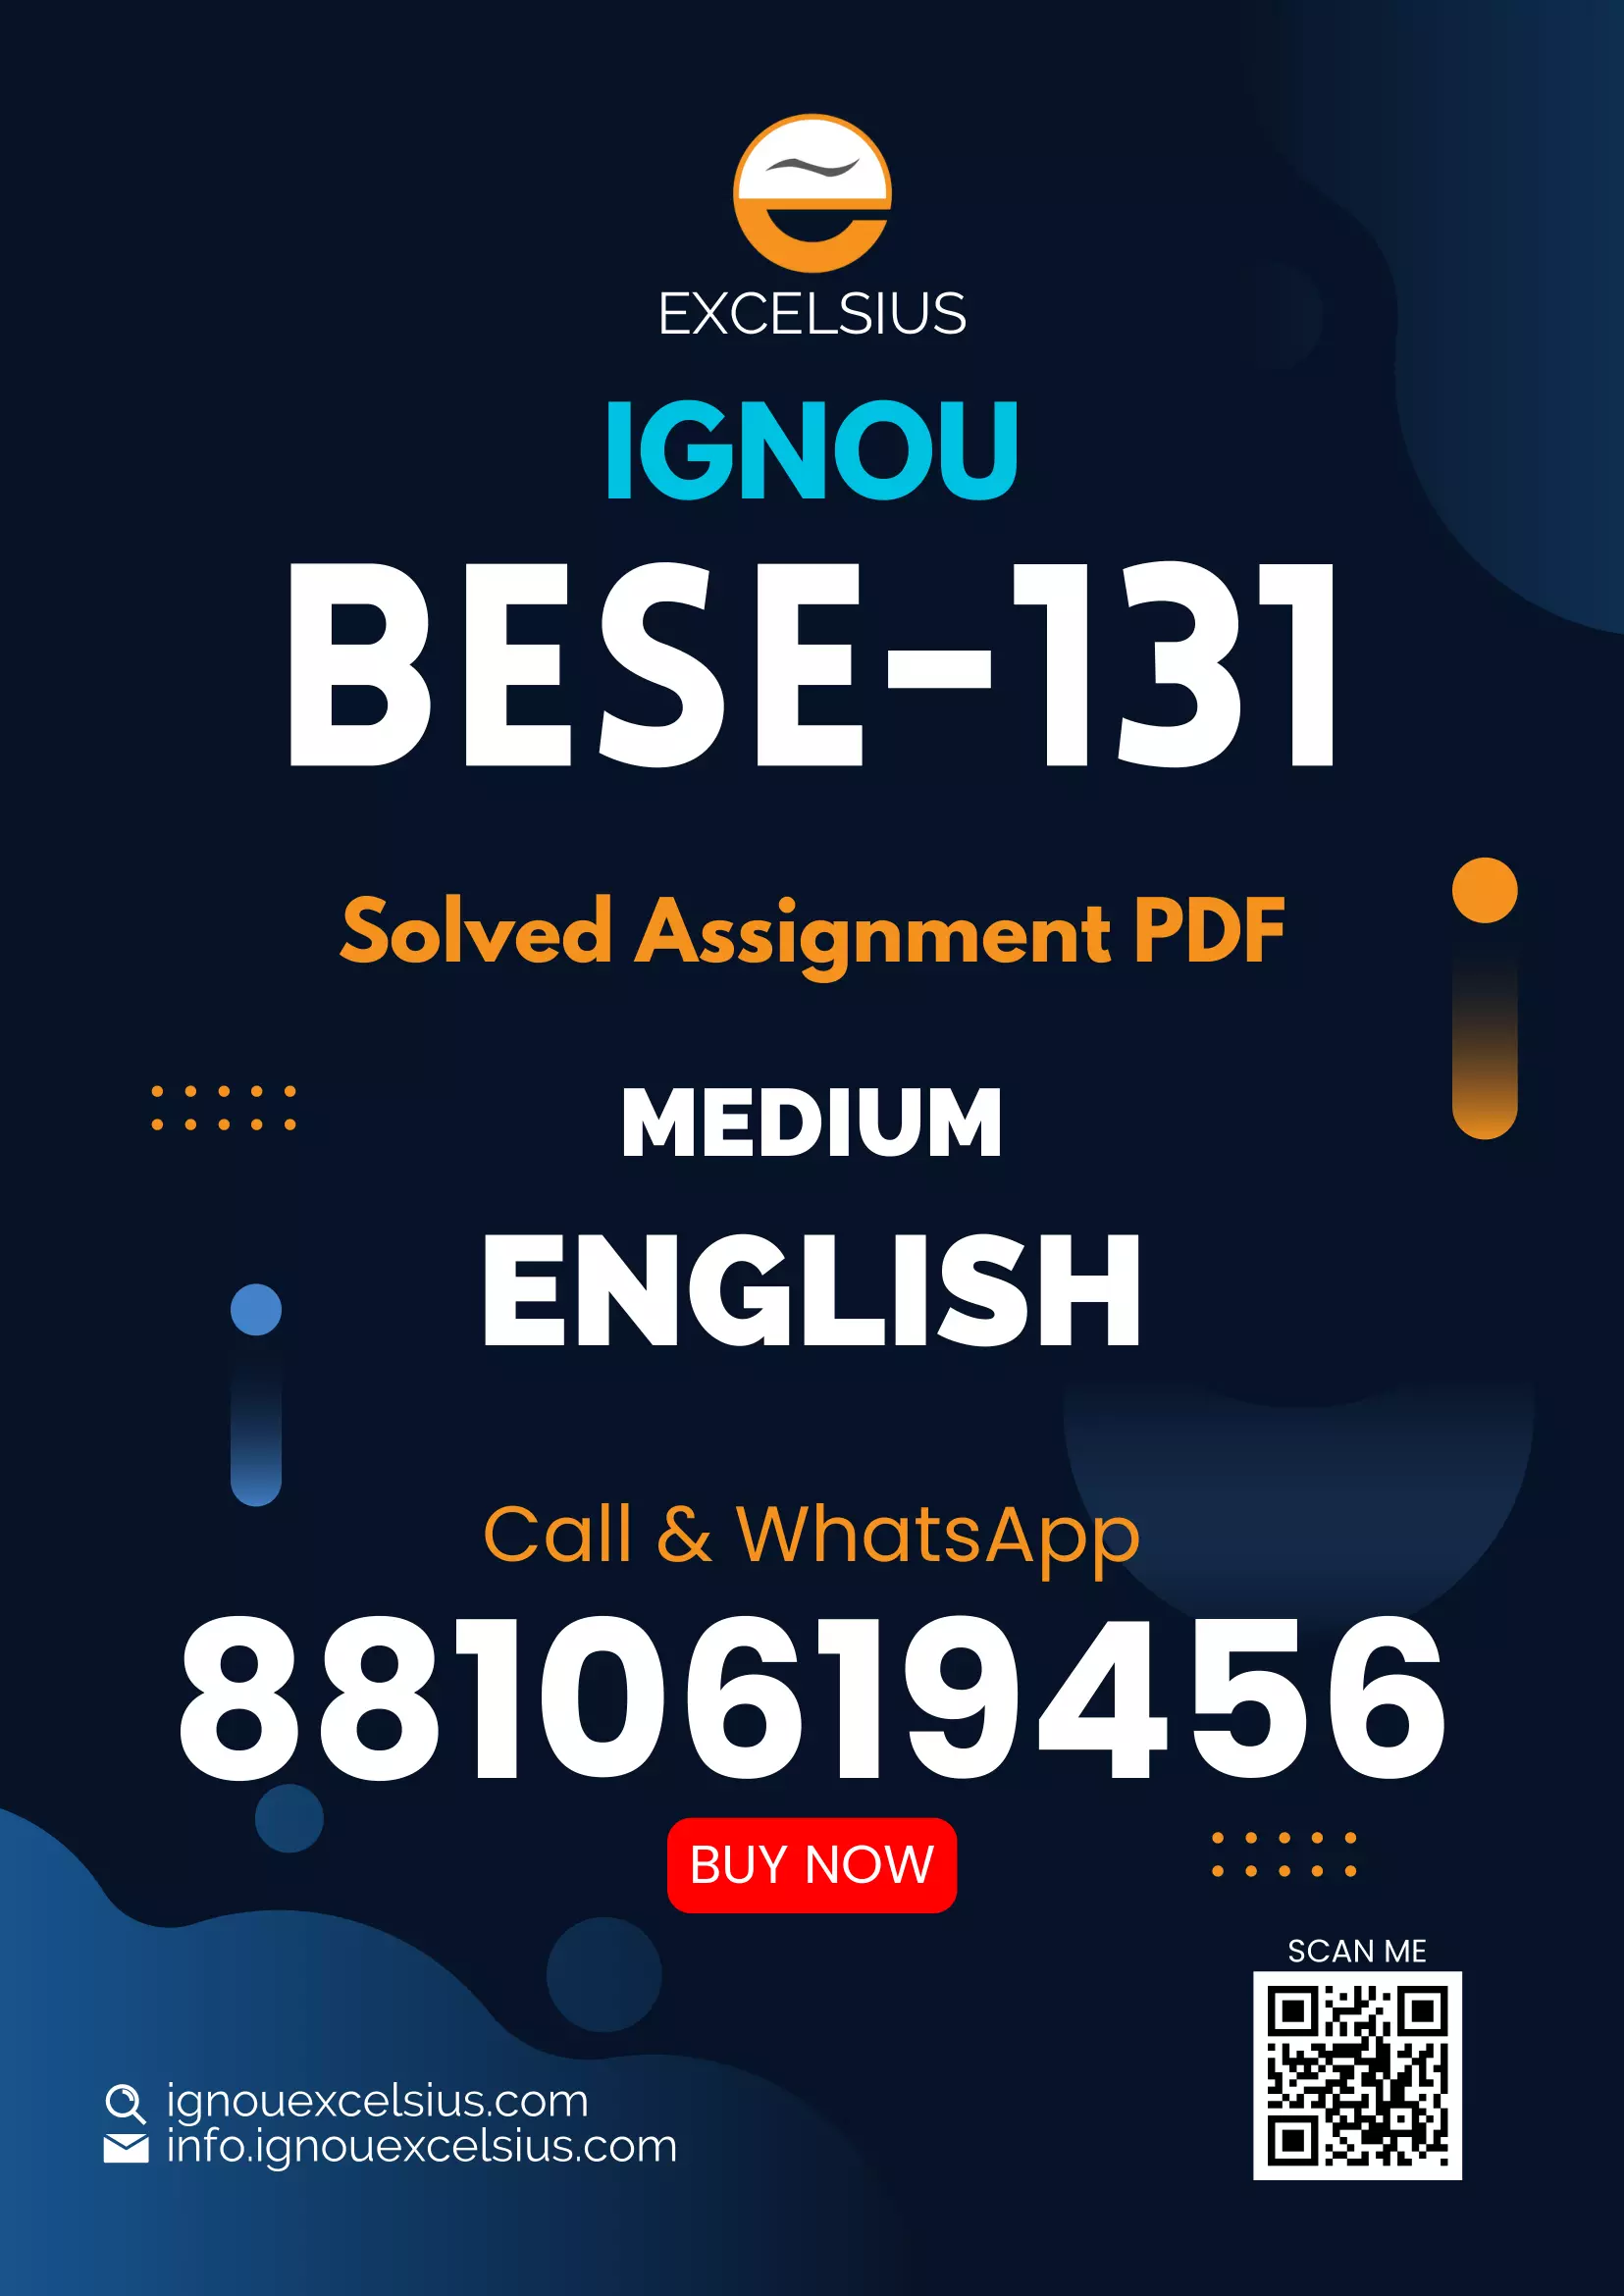 IGNOU BESE-131 - Open and Distance Education, Latest Solved Assignment-January 2022